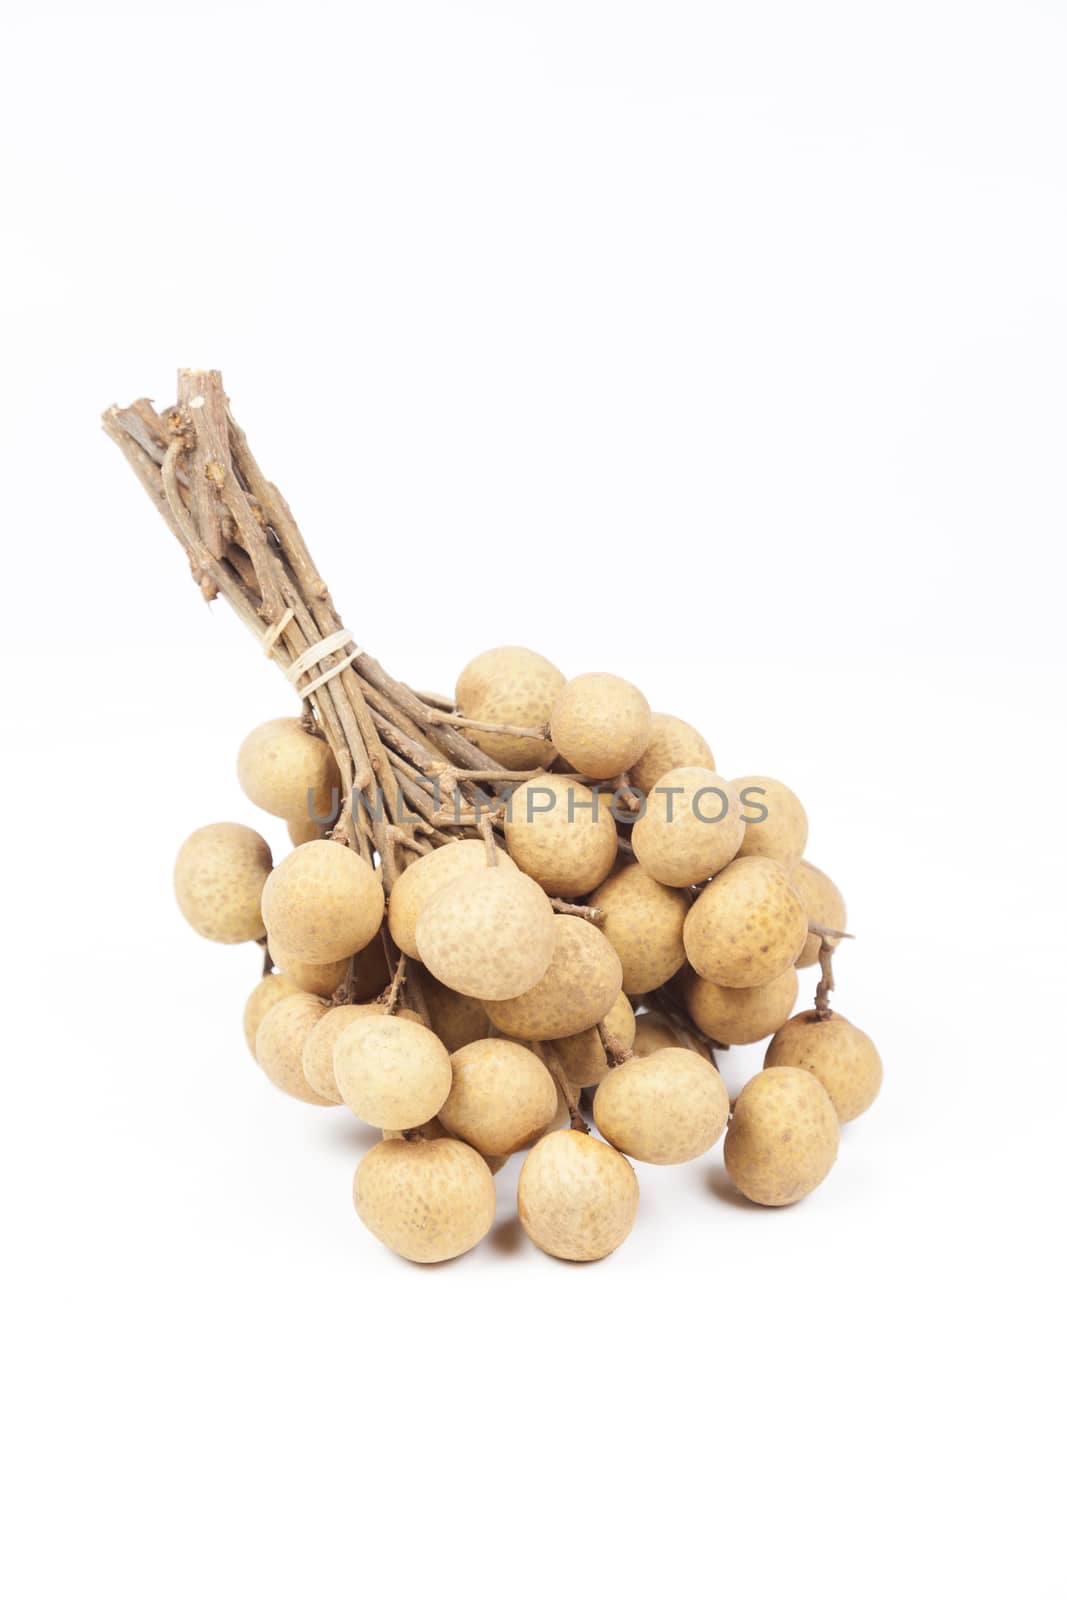 Longan on white isolated background in studio.fruit is sweet.